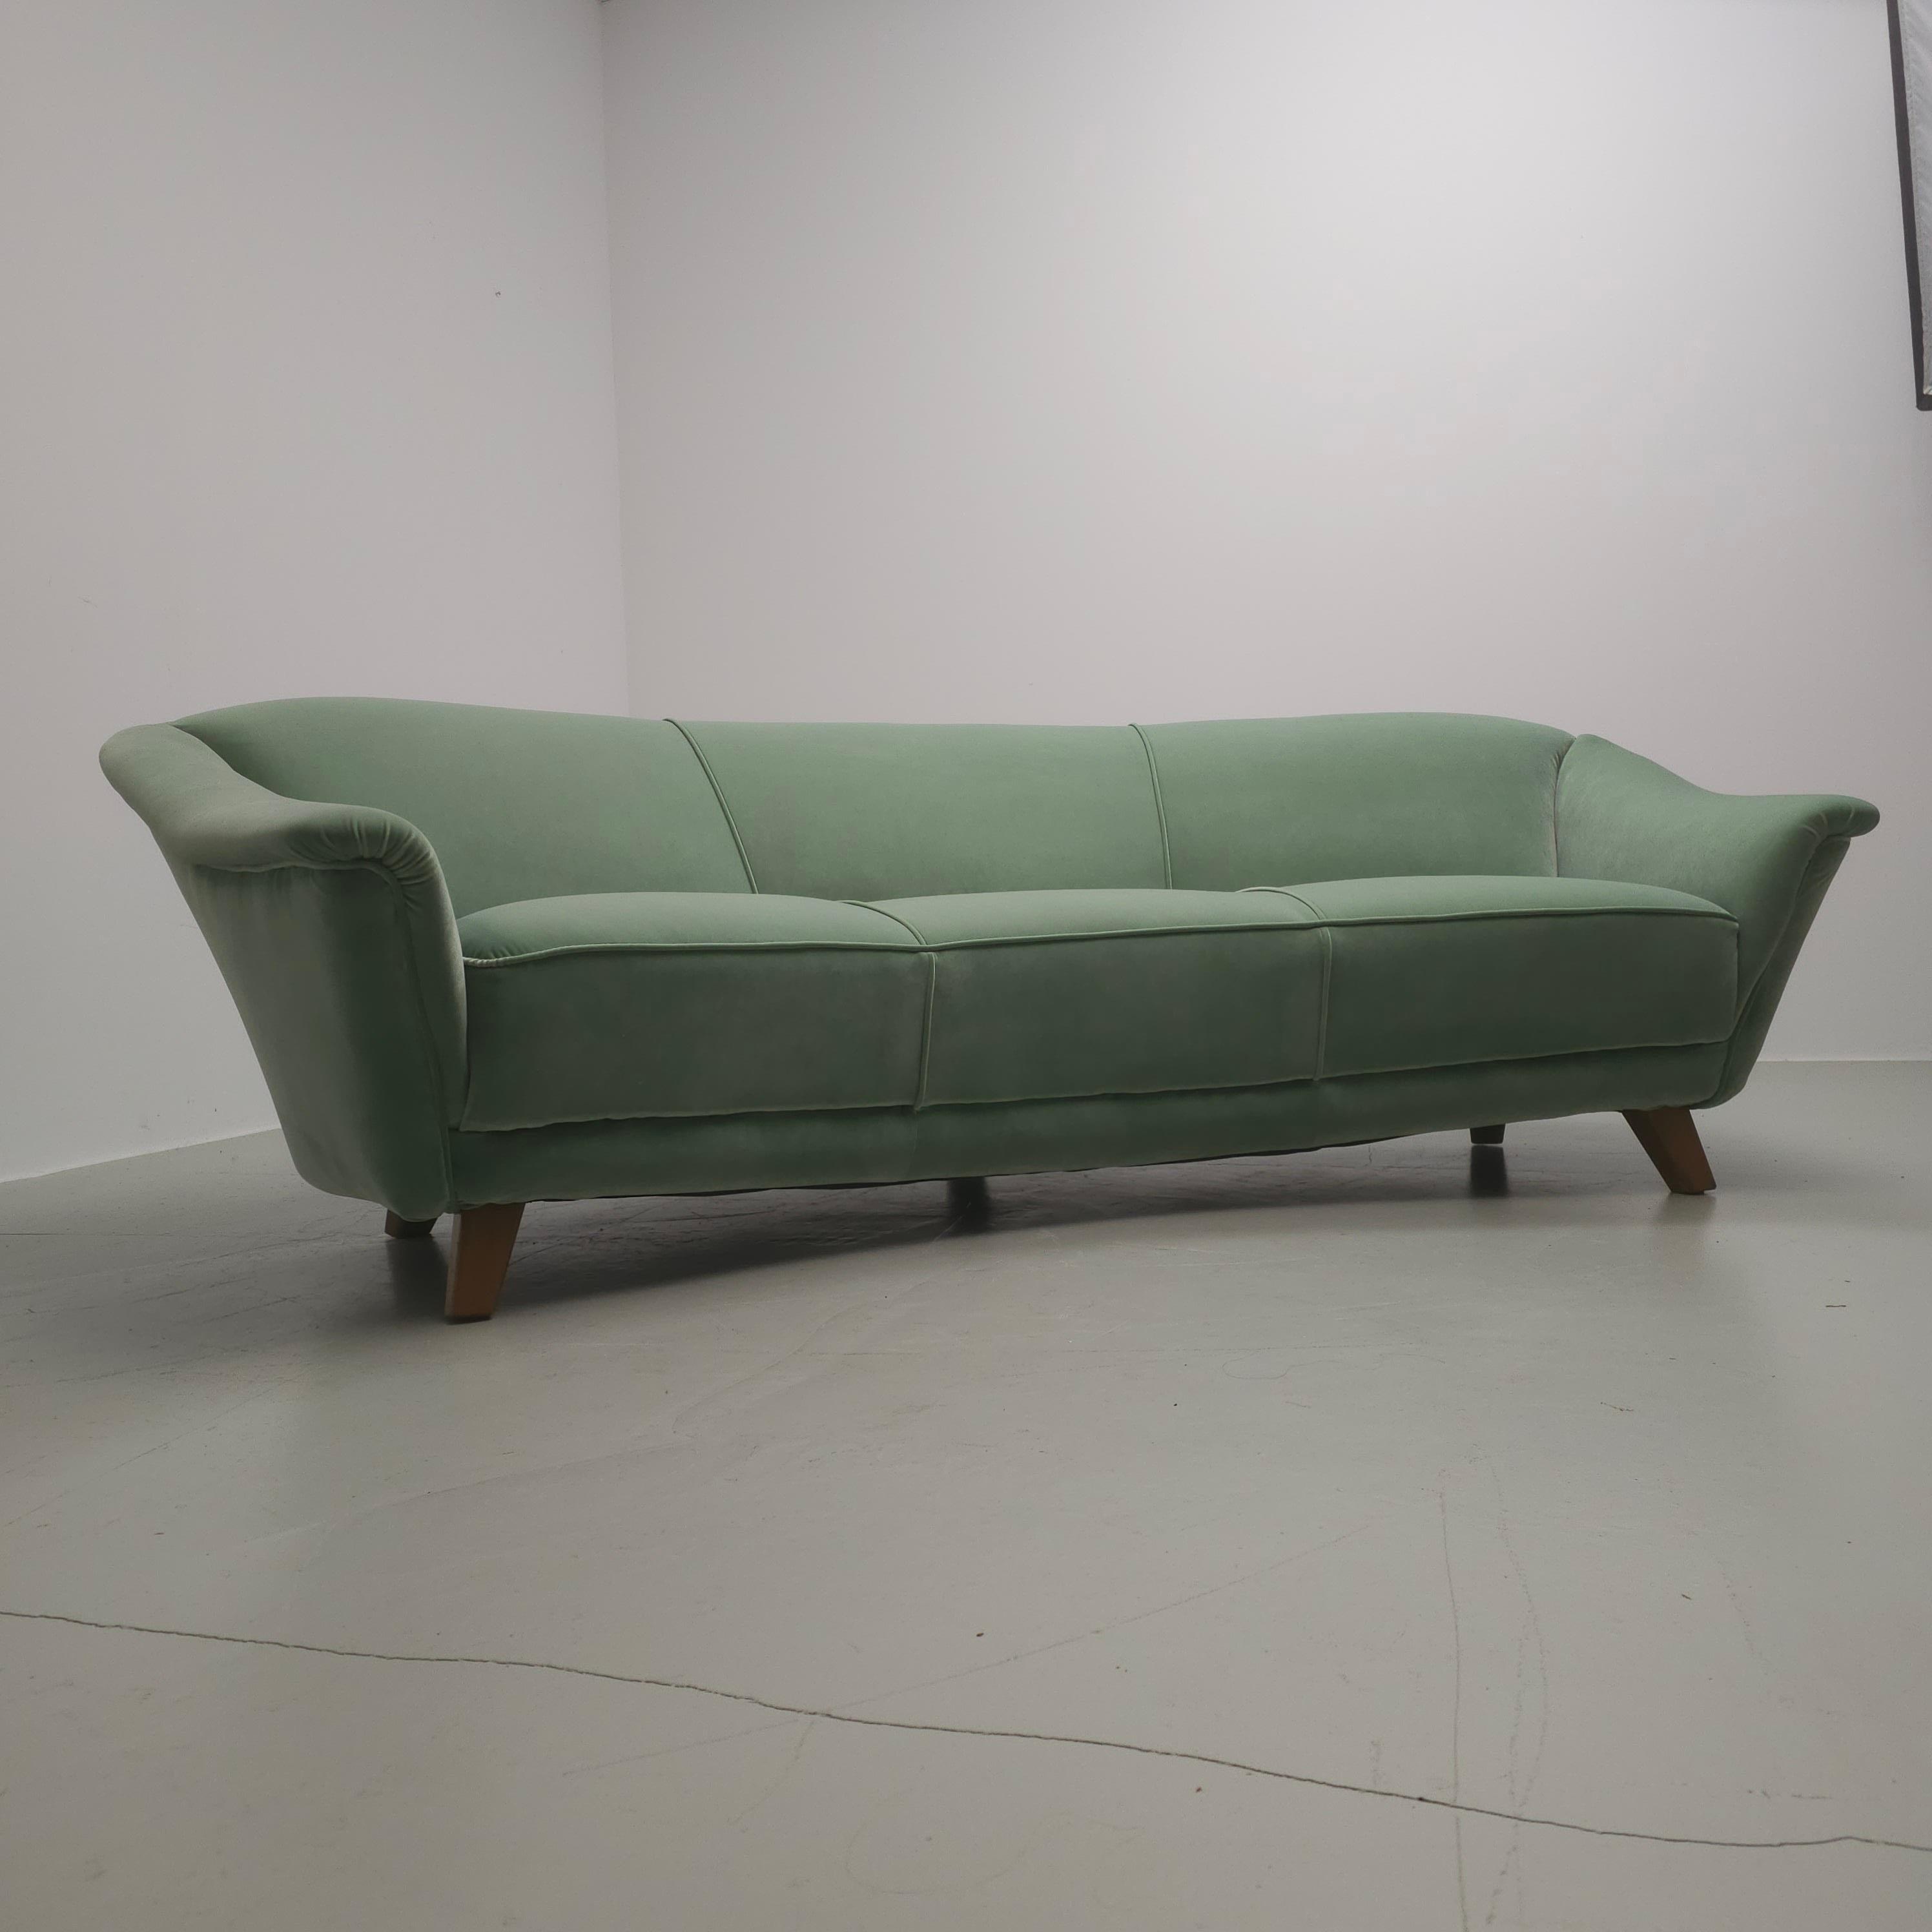 'Banana' shape, 50's couch. Newly reupholstered in a green color, velvet fabric. The back and seating have new foam.
As a square the couch is measured W230xD116xH76cm. As the shape is like a banana it is W230xD90xH76cm.
If you like the sofa but need